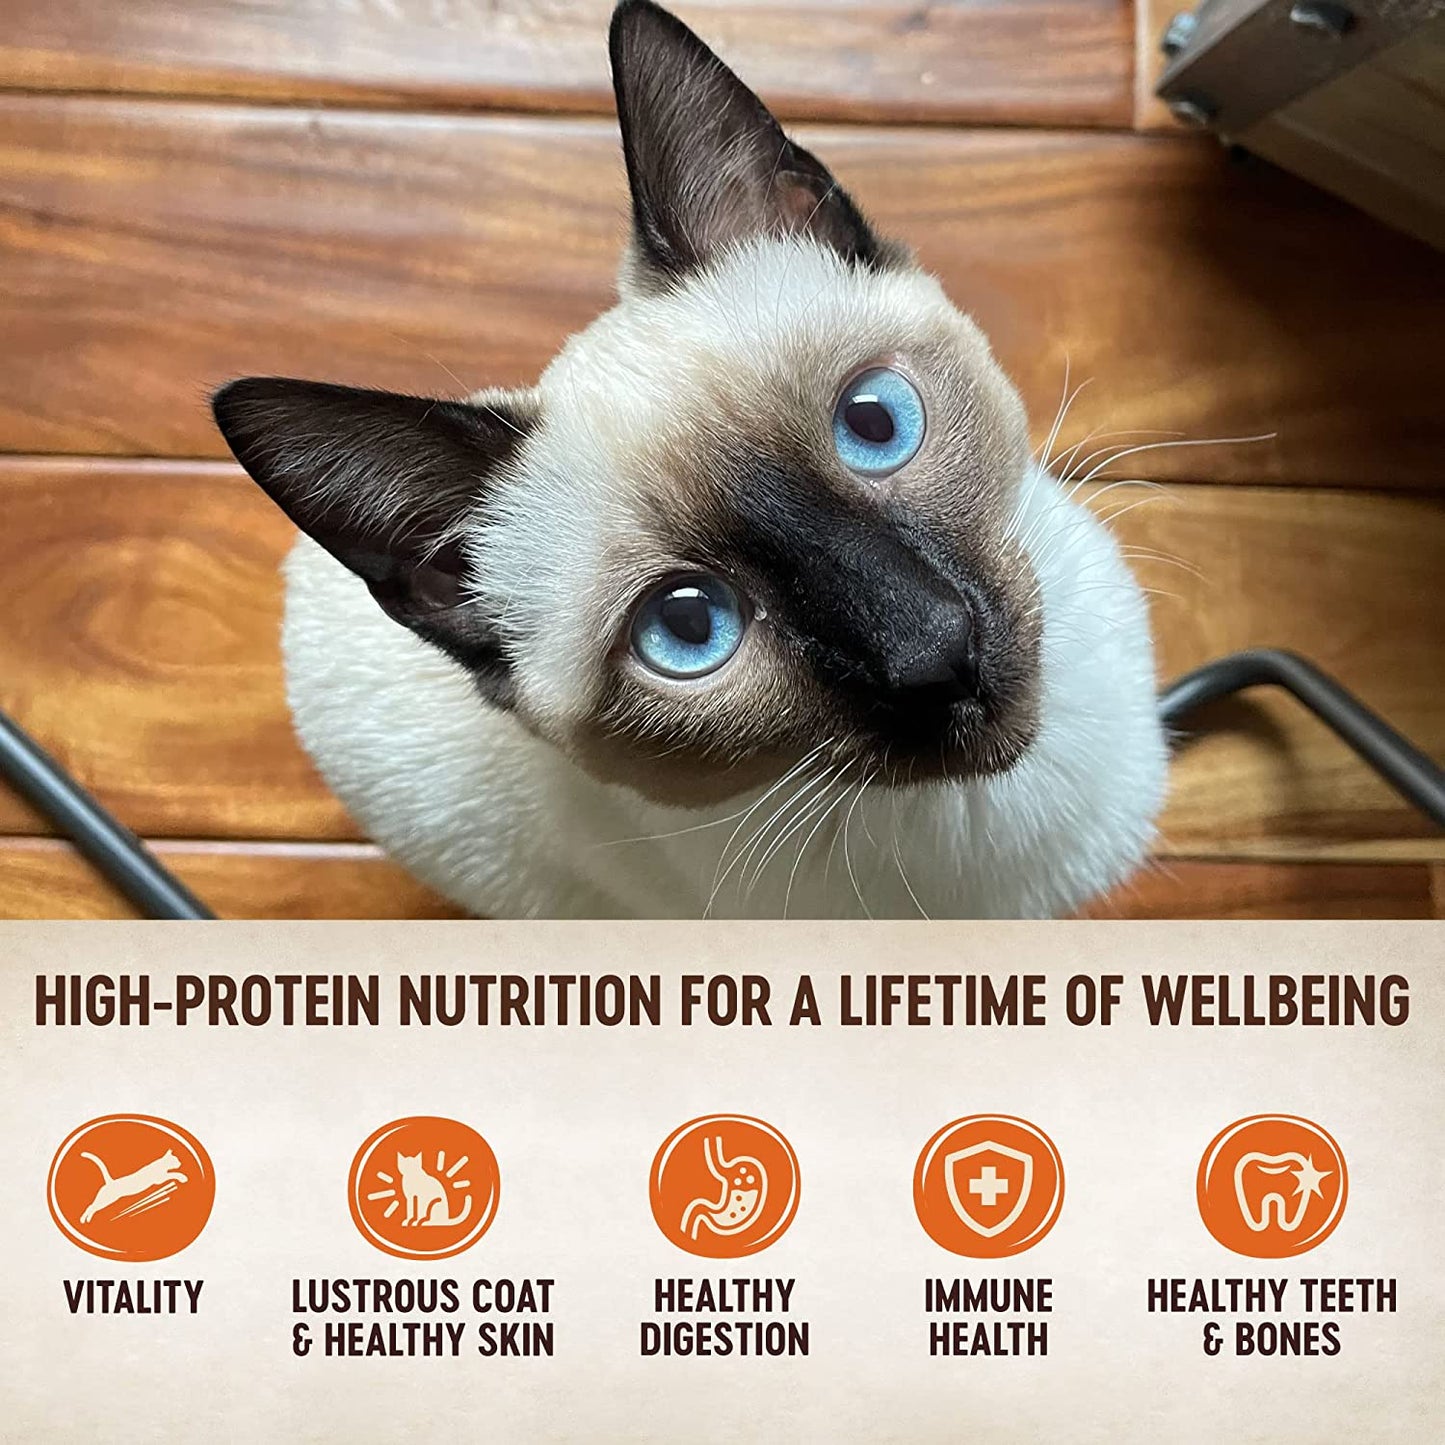 Wellness CORE Grain-Free Signature Selects Wet Cat Food, Natural Pet Food Made with Real Meat (Shredded Chicken & Chicken Liver, 5.3 Ounces, Pack of 12)